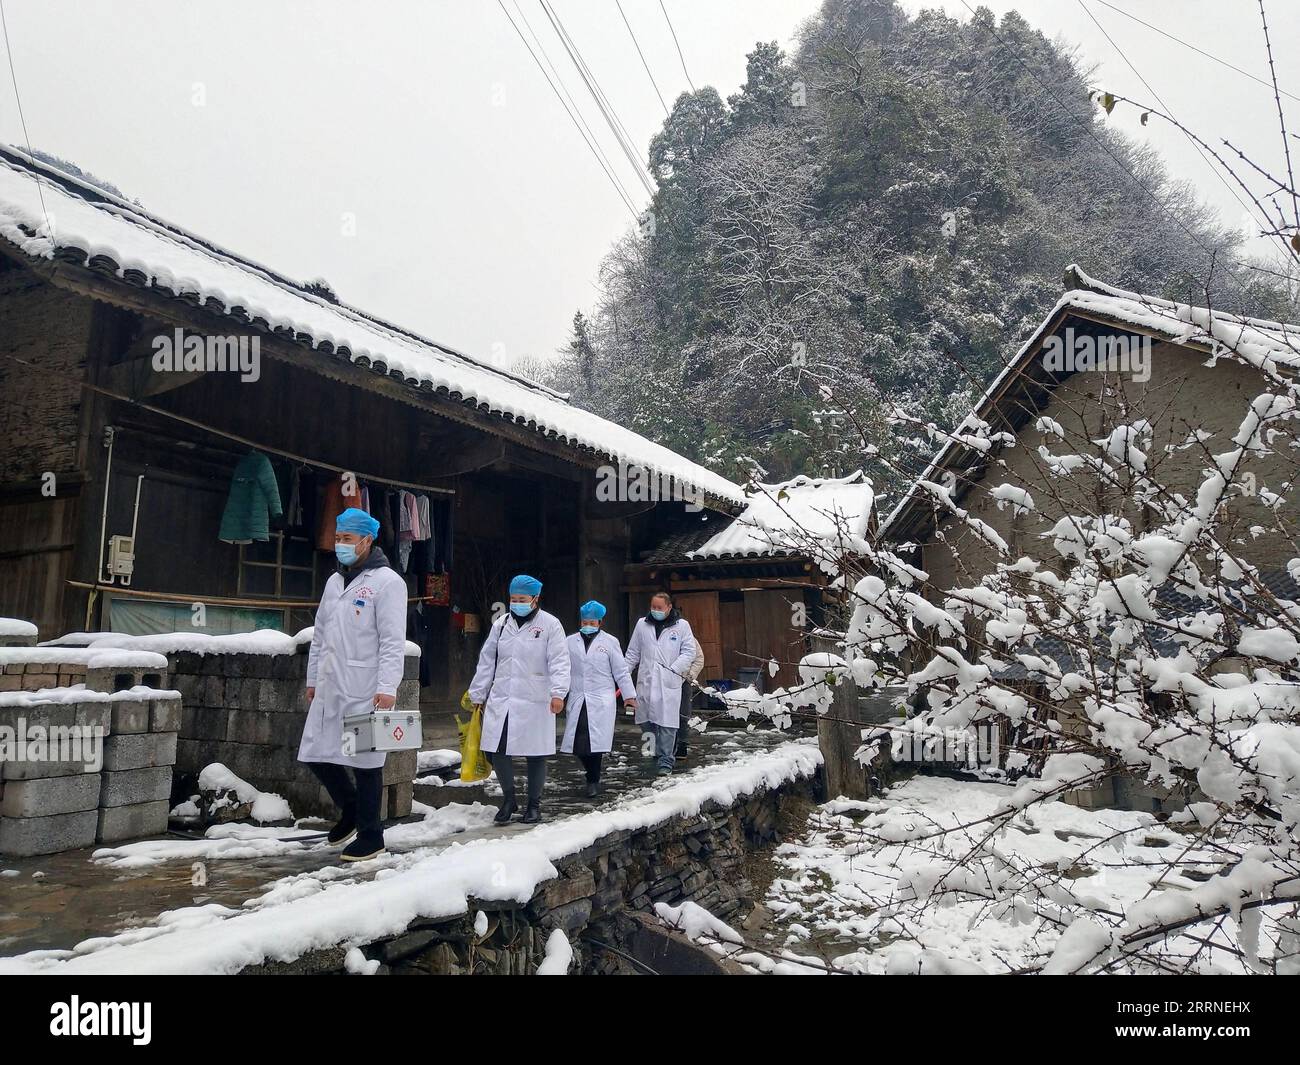 230107 -- BEIJING, Jan. 7, 2023 -- Rural doctors visit local households to provide medical support in Jiwei Town of Huayuan County, central China s Hunan Province, Dec. 29, 2022. Photo by /Xinhua Xinhua Headlines: Six fallacies and truths about China s epidemic control JianxBiao PUBLICATIONxNOTxINxCHN Stock Photo